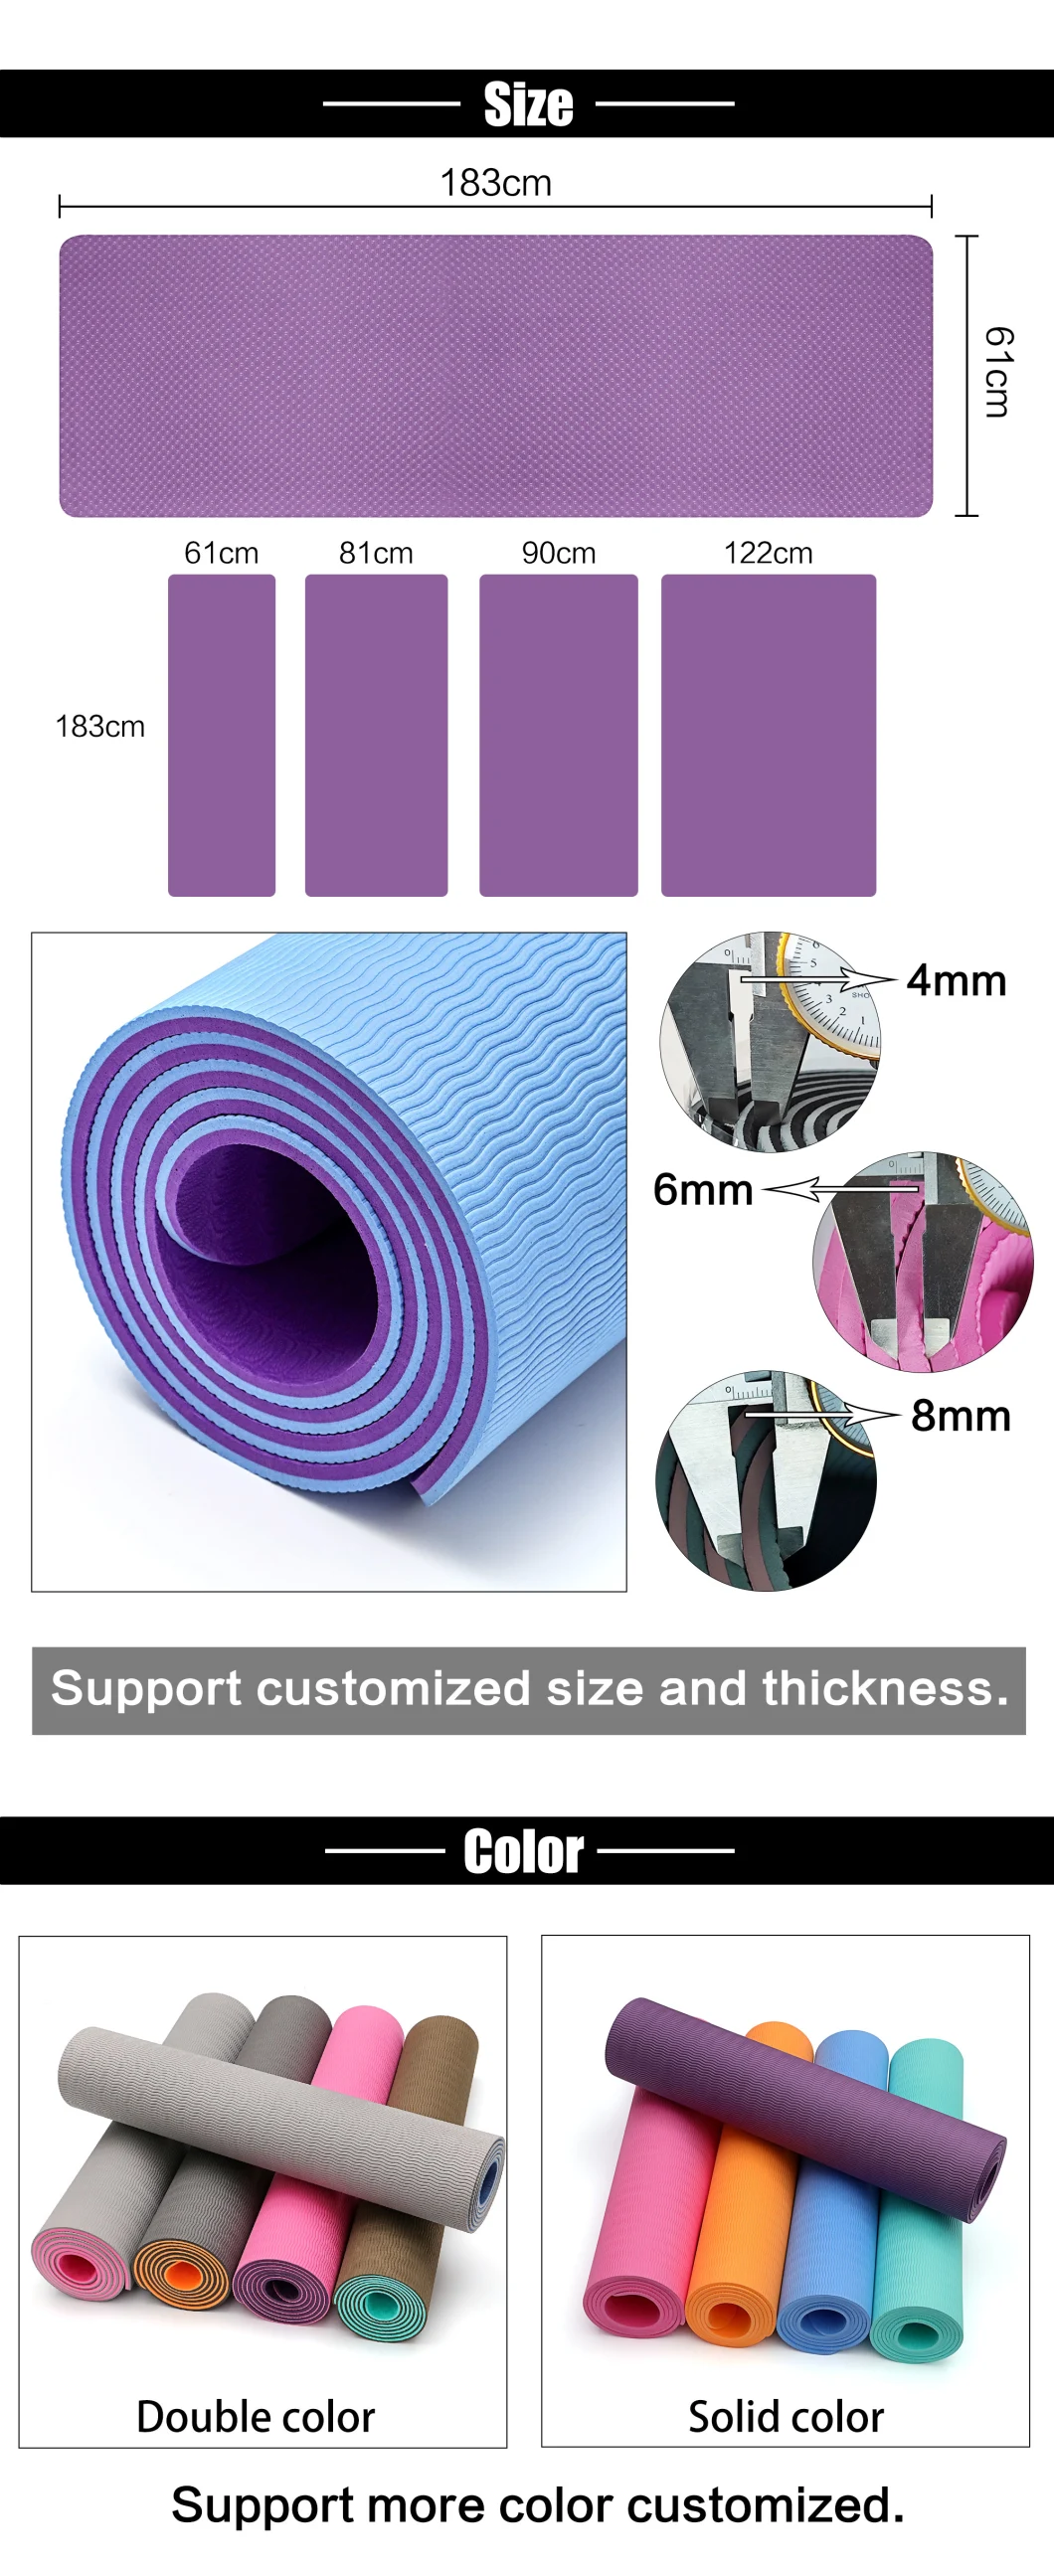 10mm Extra Thick Non Slip Exercise &amp; Fitness Yoga Mat Extremely Comfortable for All Yoga Outdoor Practice Pilates Floor Workout